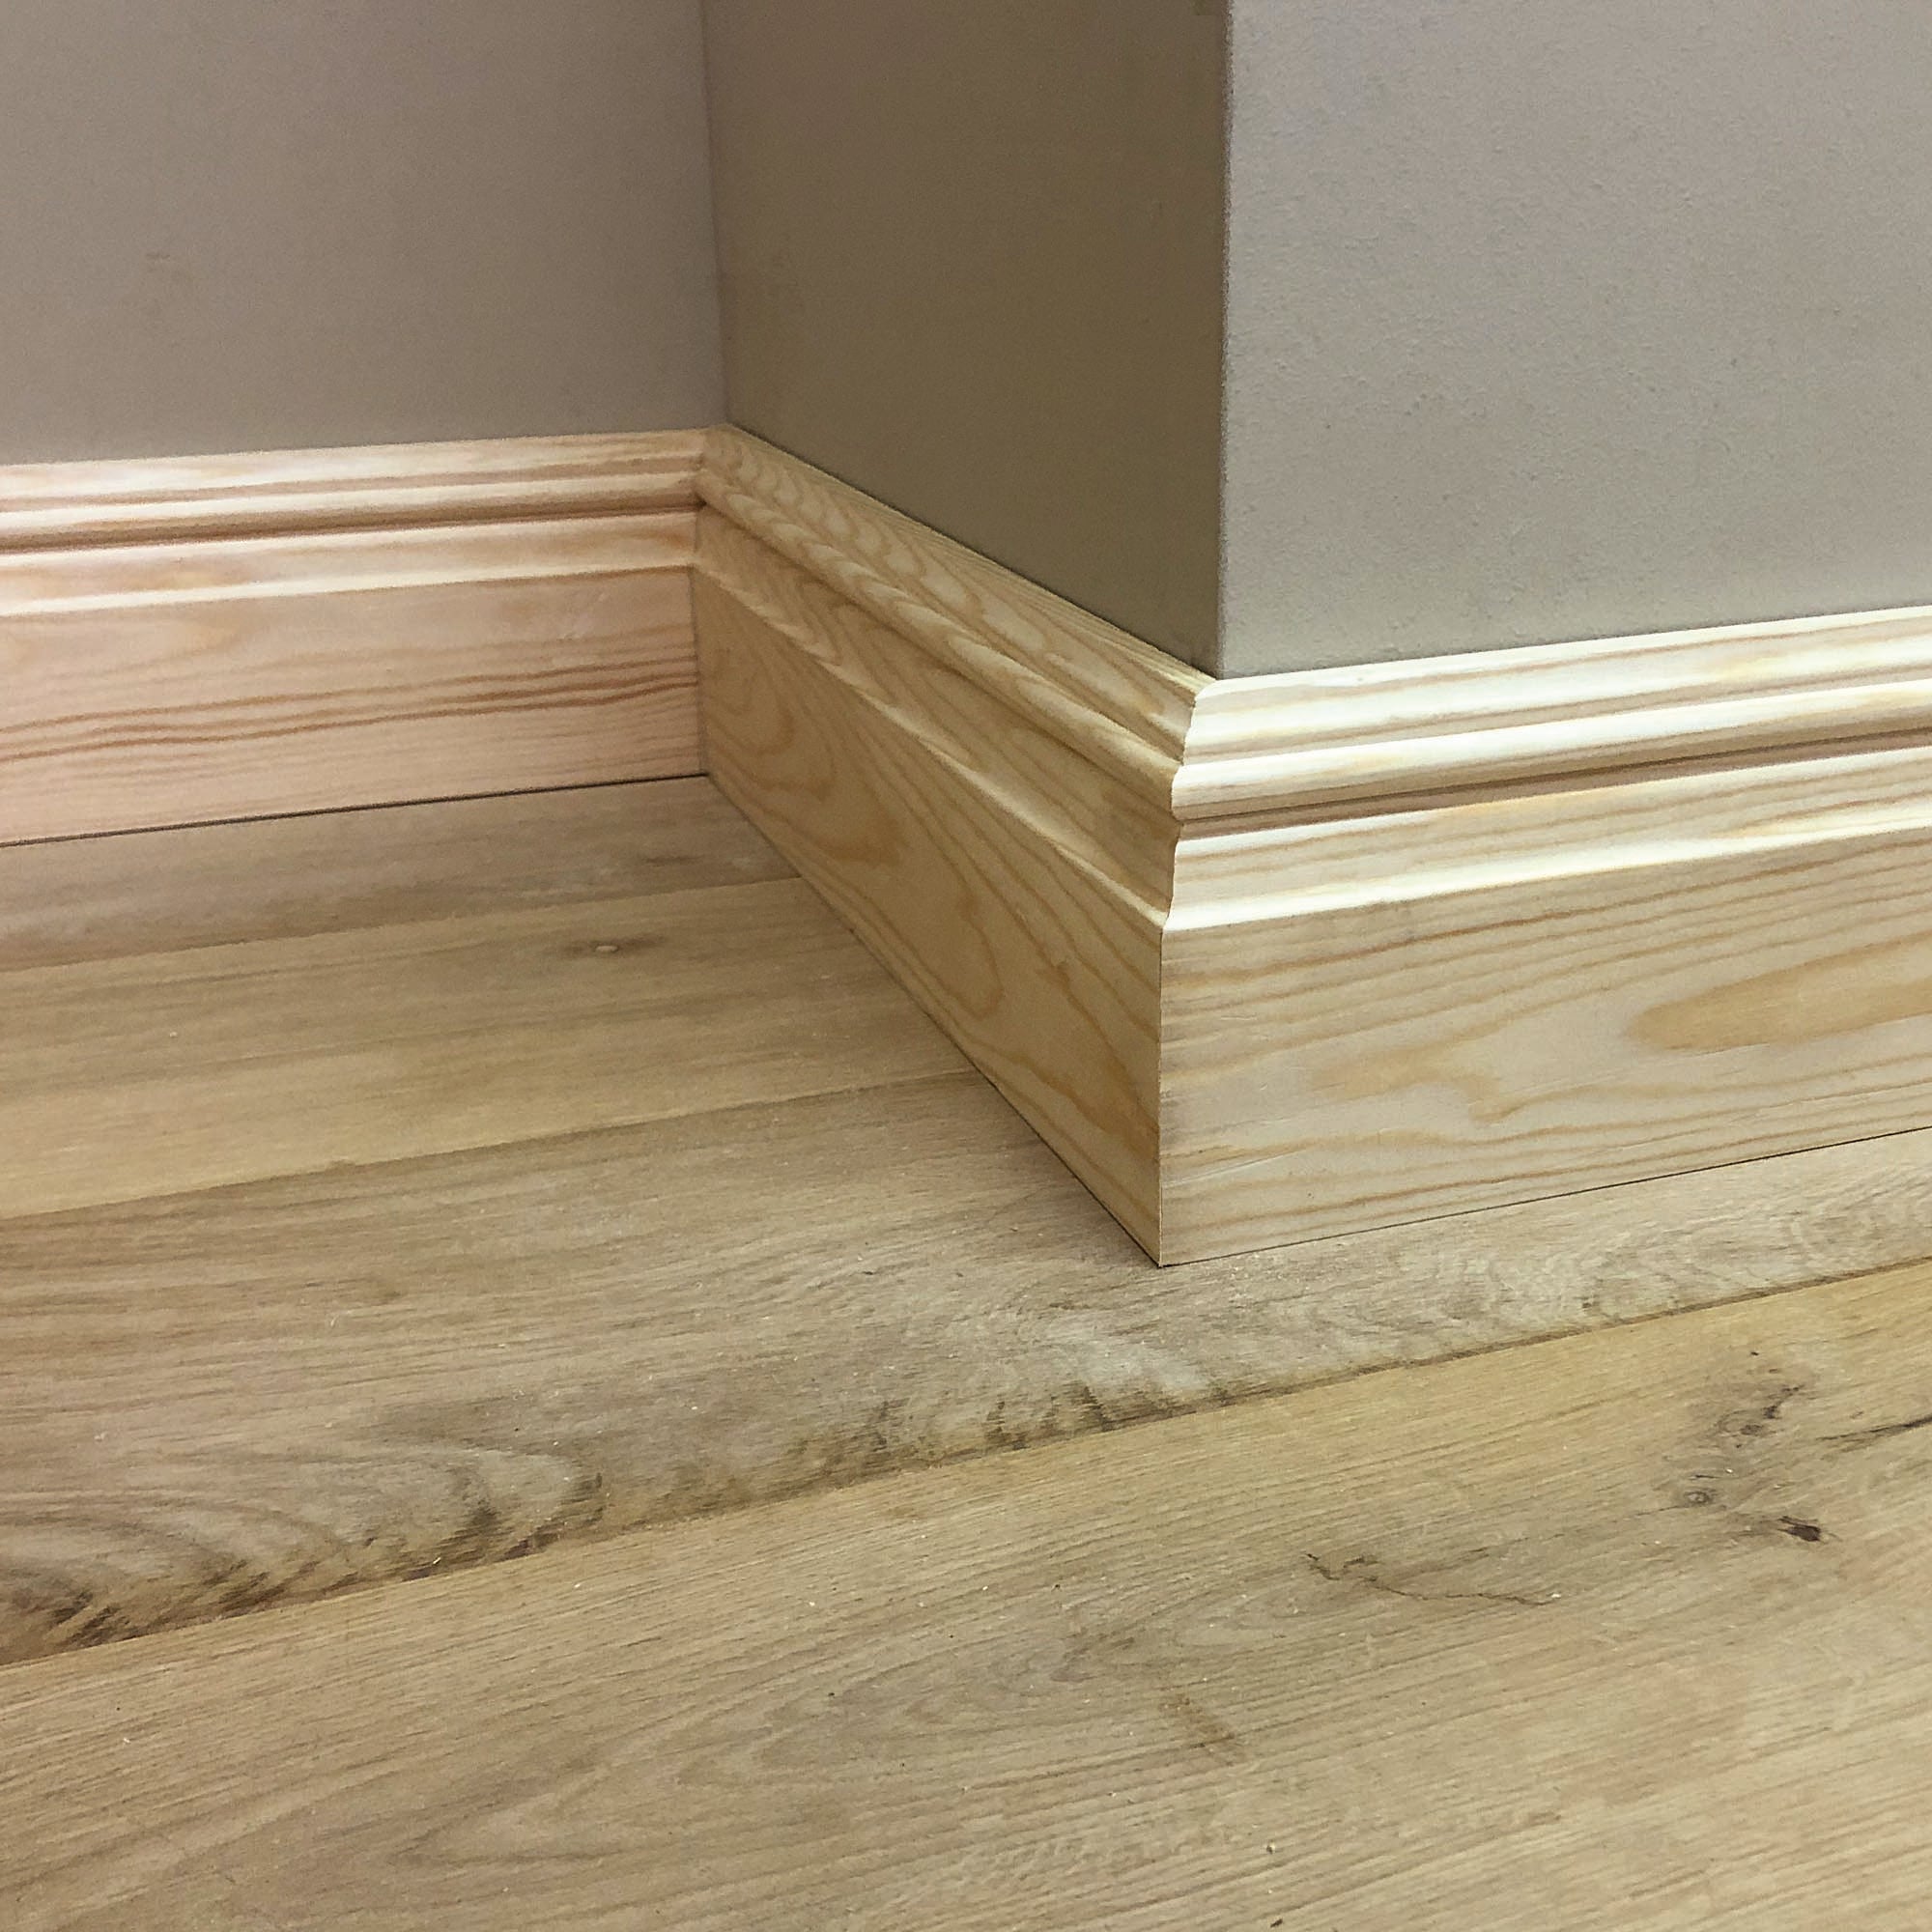 Details more than 146 6 inch skirting board super hot